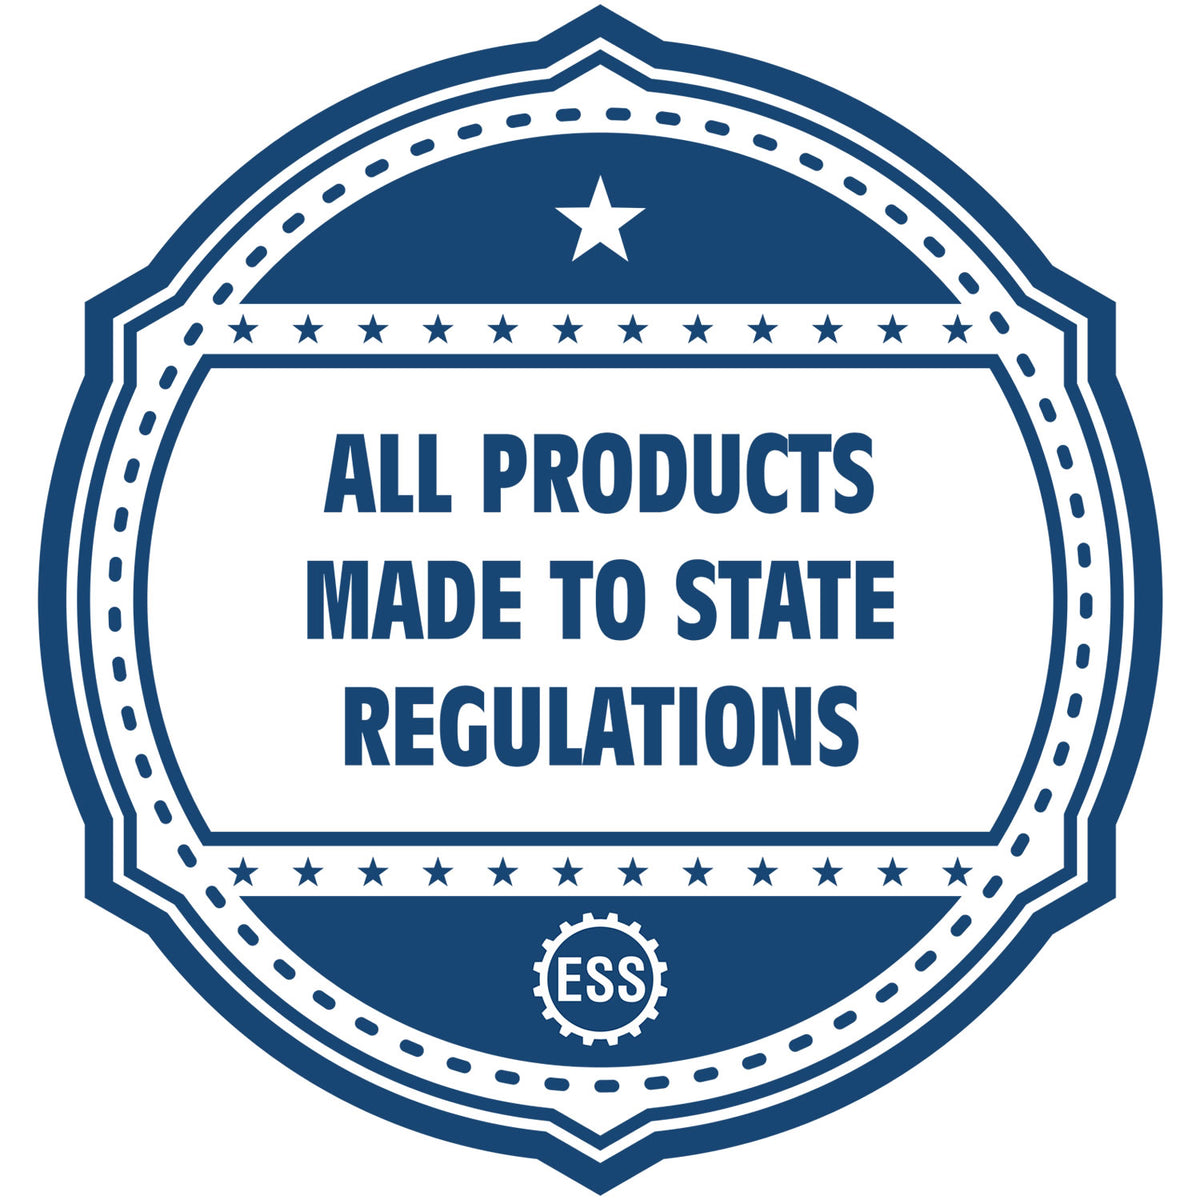 An icon or badge element for the Self-Inking Tennessee Landscape Architect Stamp showing that this product is made in compliance with state regulations.